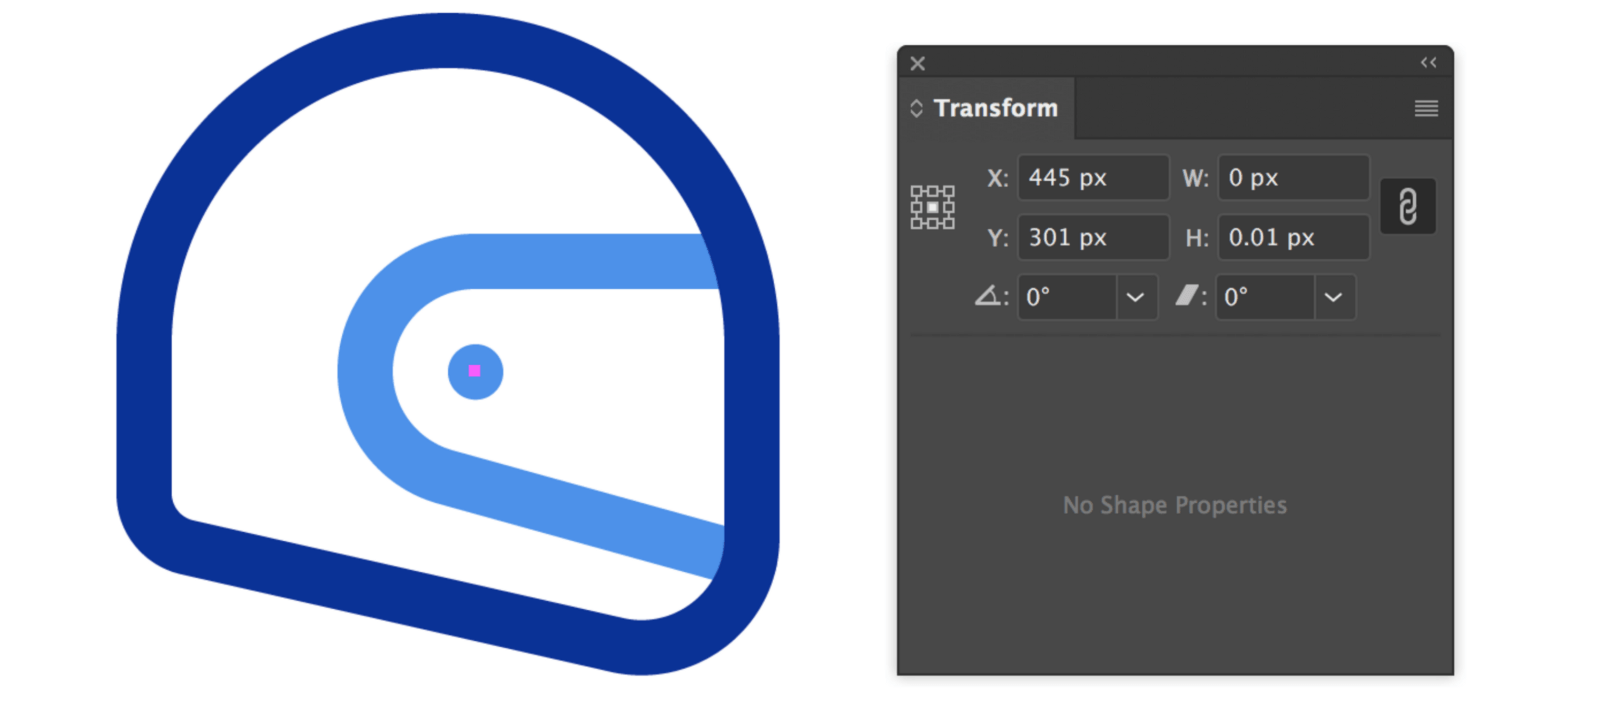 Z in Blue Circle Logo - How to Make a Dot – Prototypr